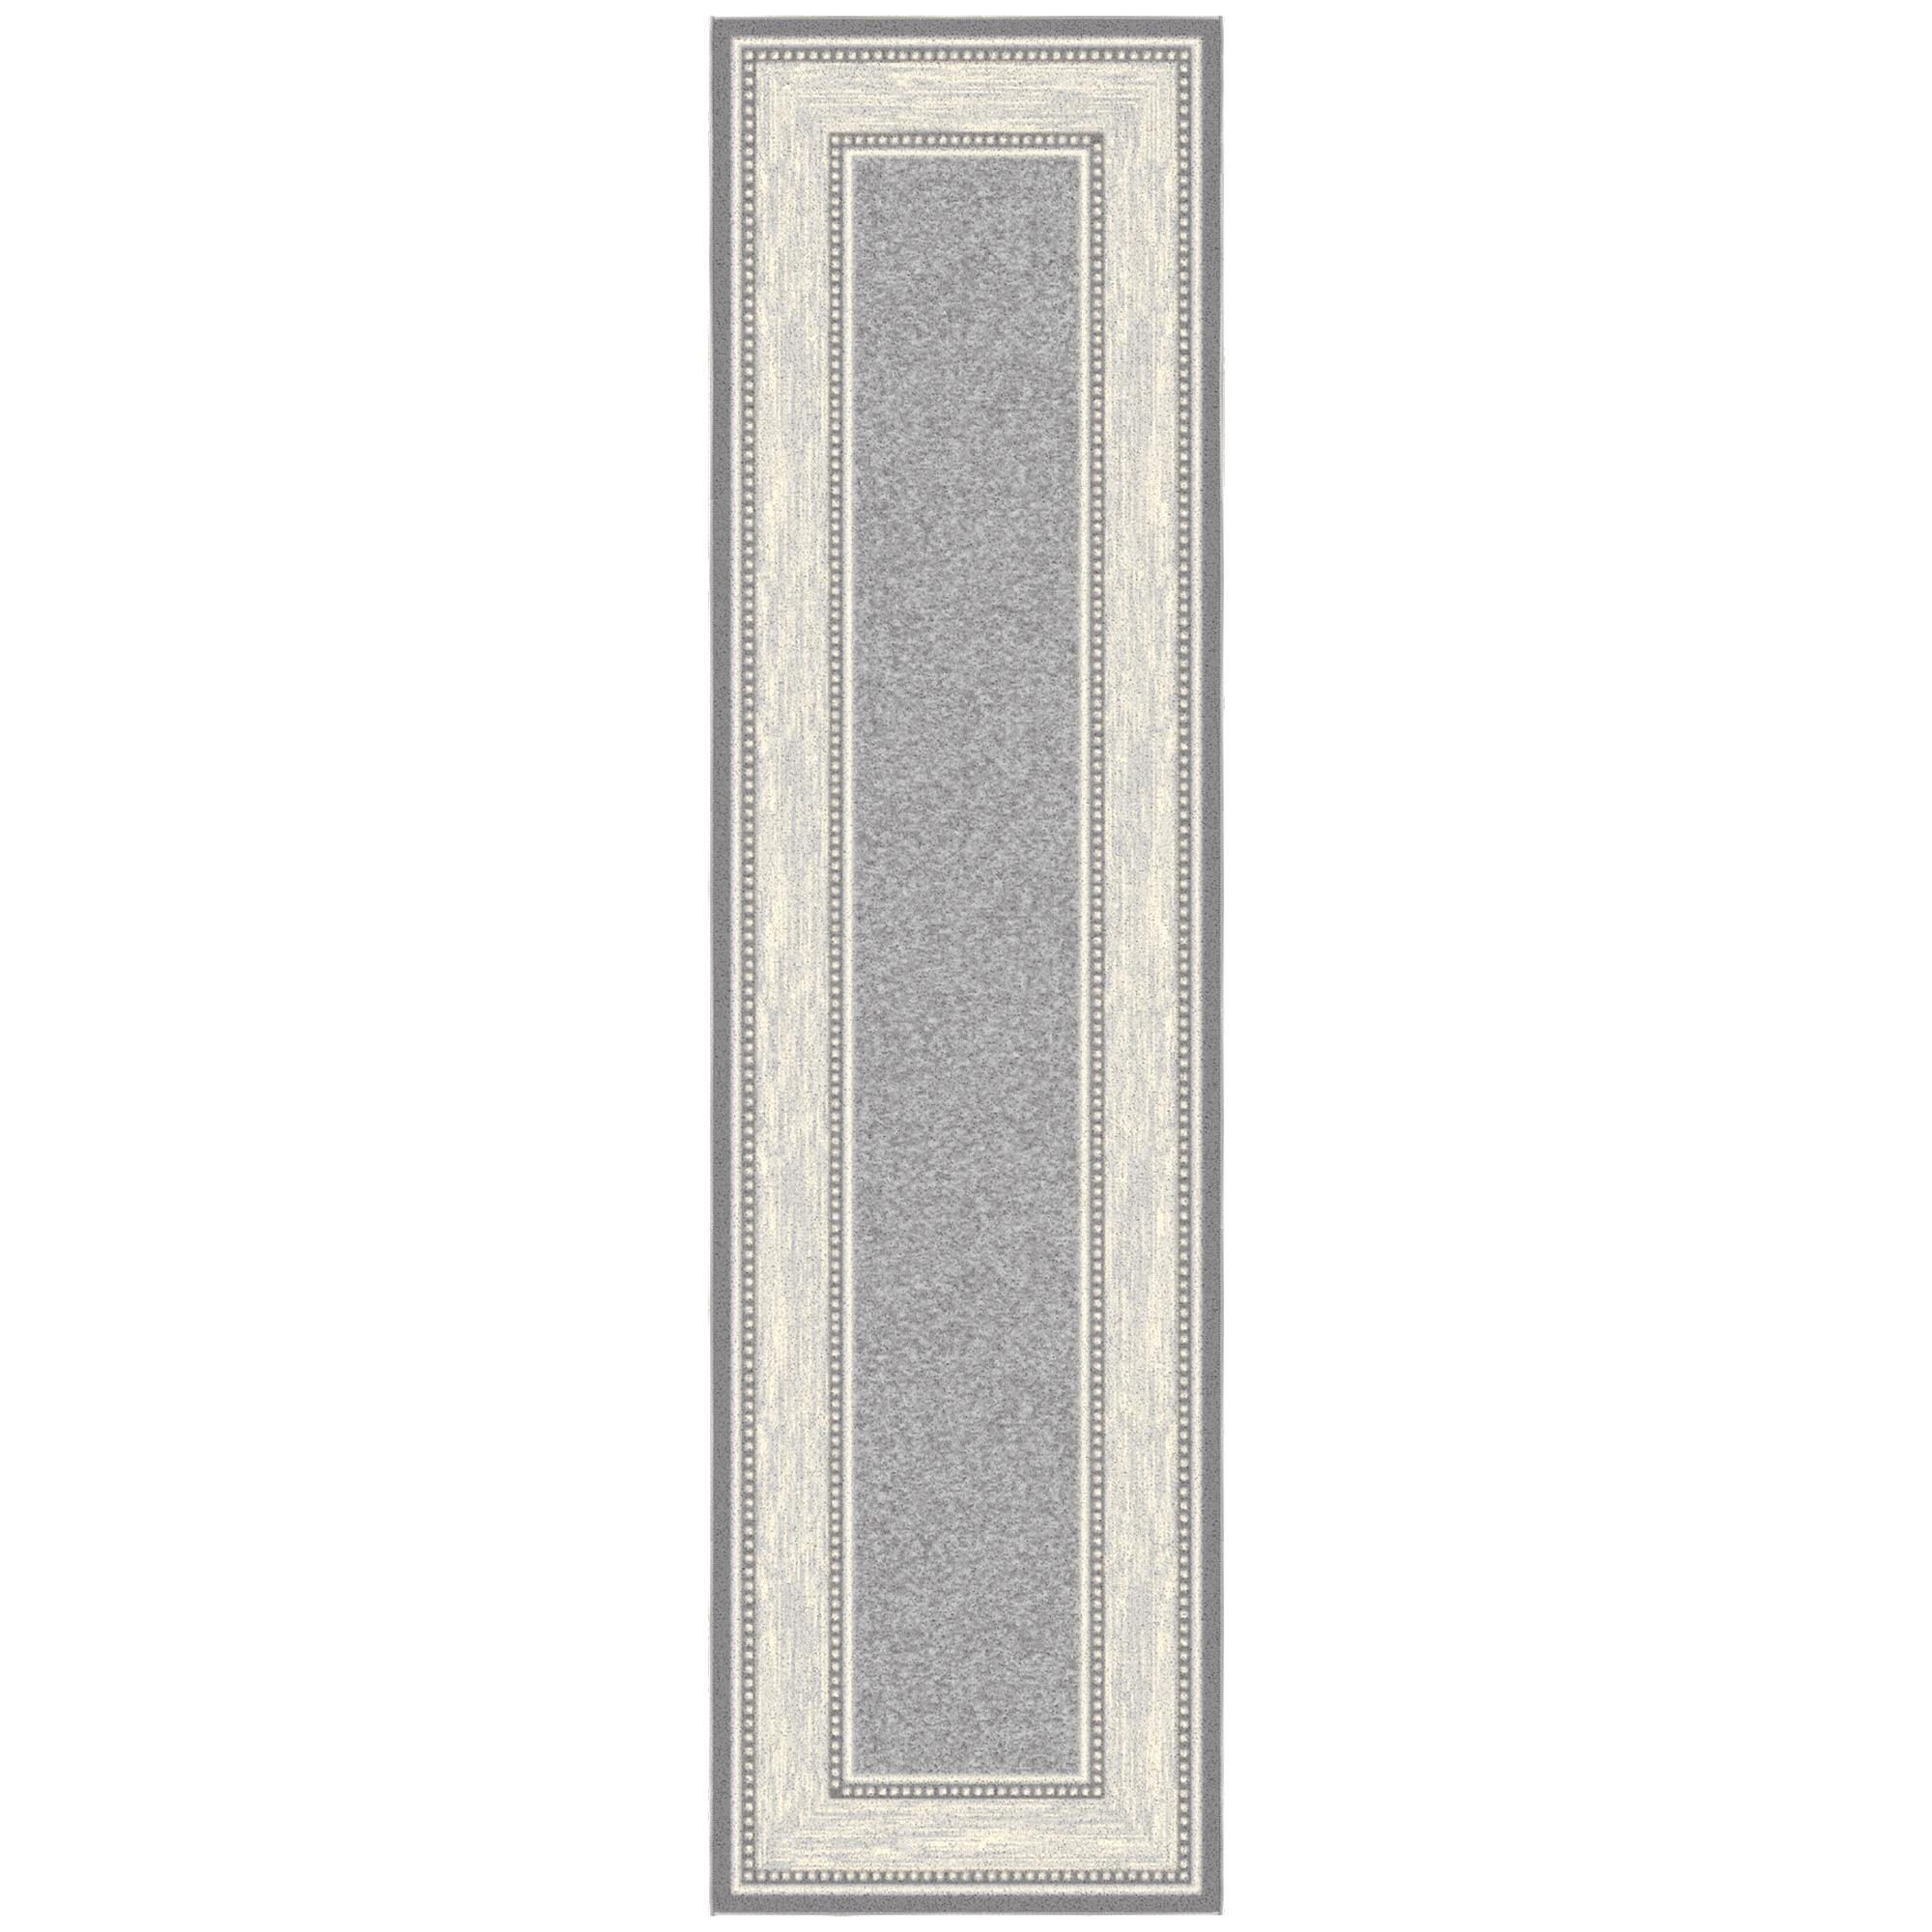 Waterproof Non-Slip Rubberback Ribbed Gray Indoor/Outdoor Utility Rug Ottomanson Rug Size: Rectangle 3' x 3'11